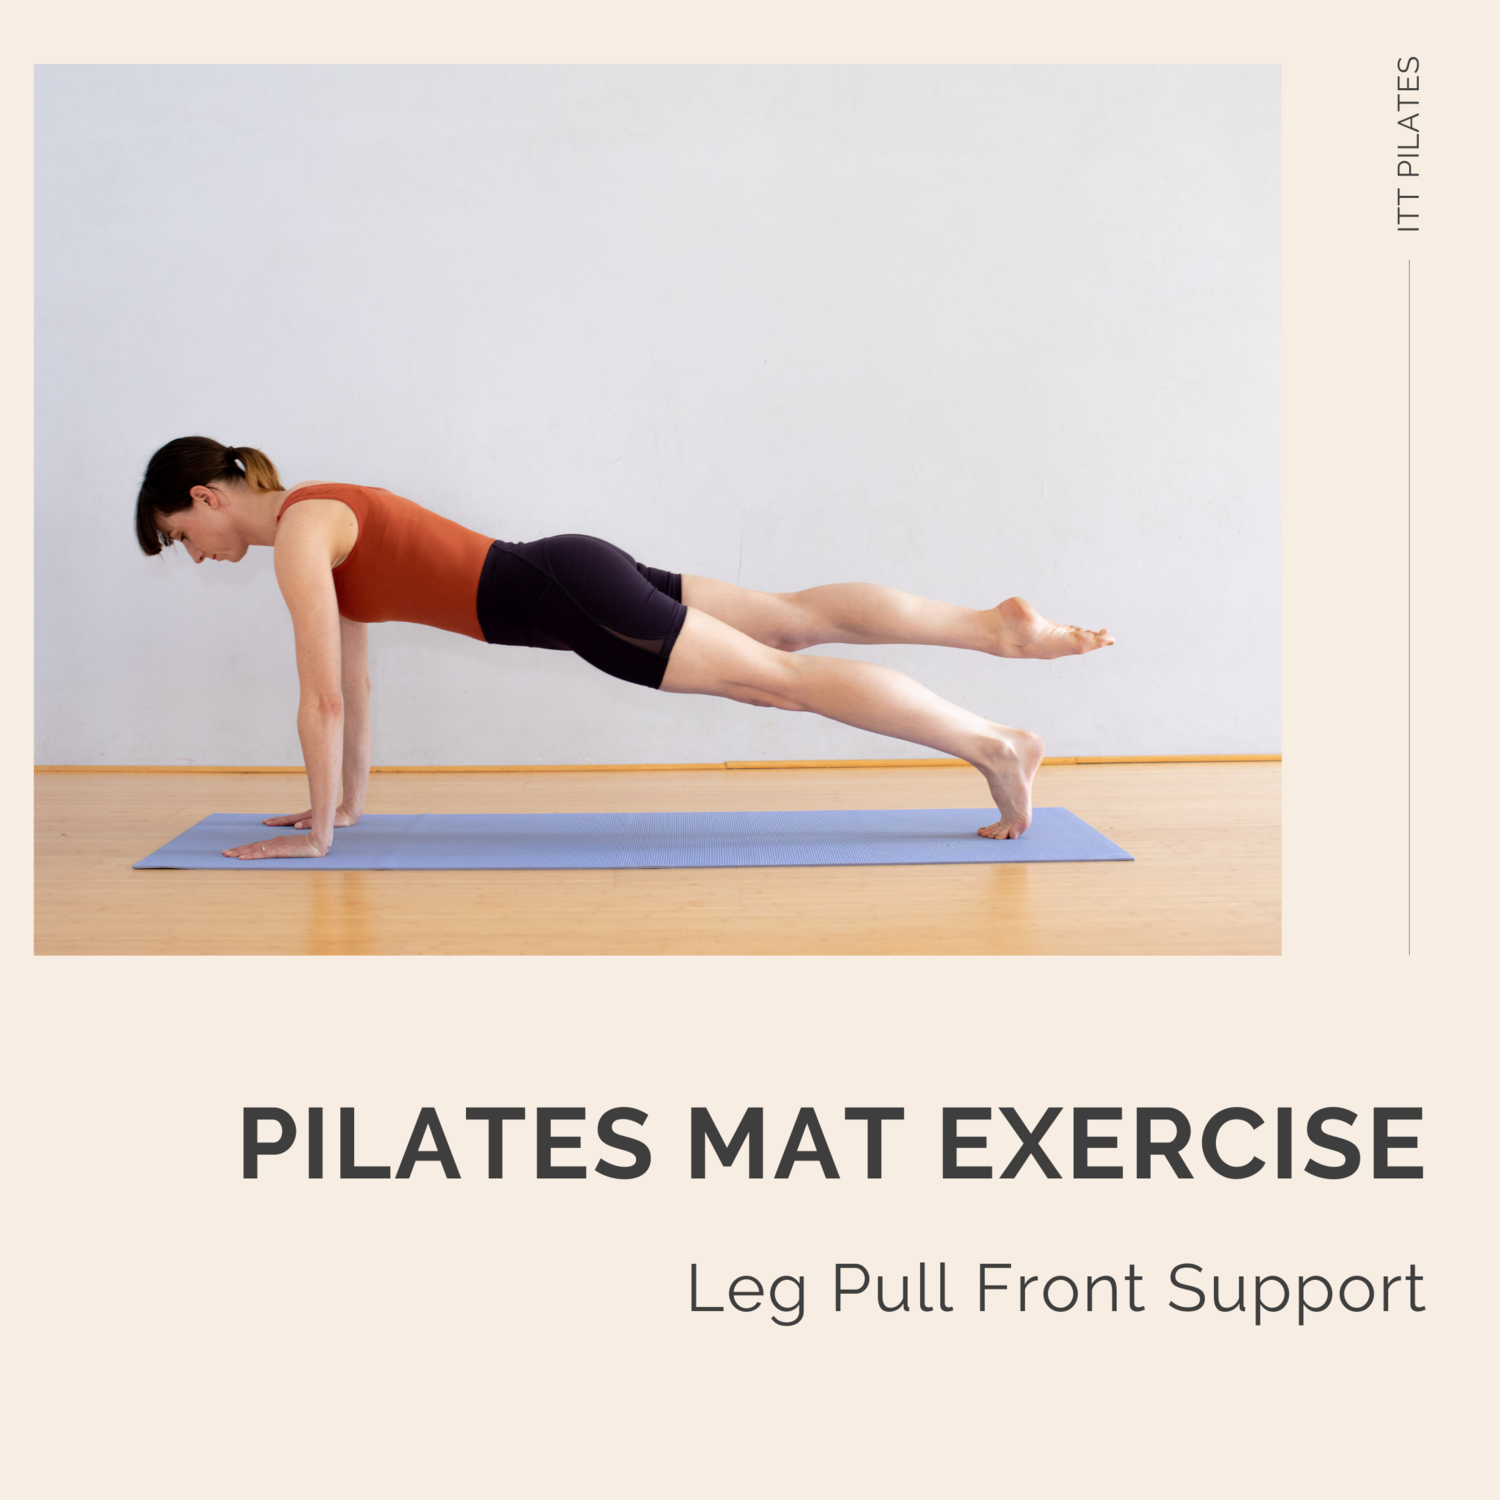 Save Your Wrists! Practice Pilates Leg Pull Front on the Arc